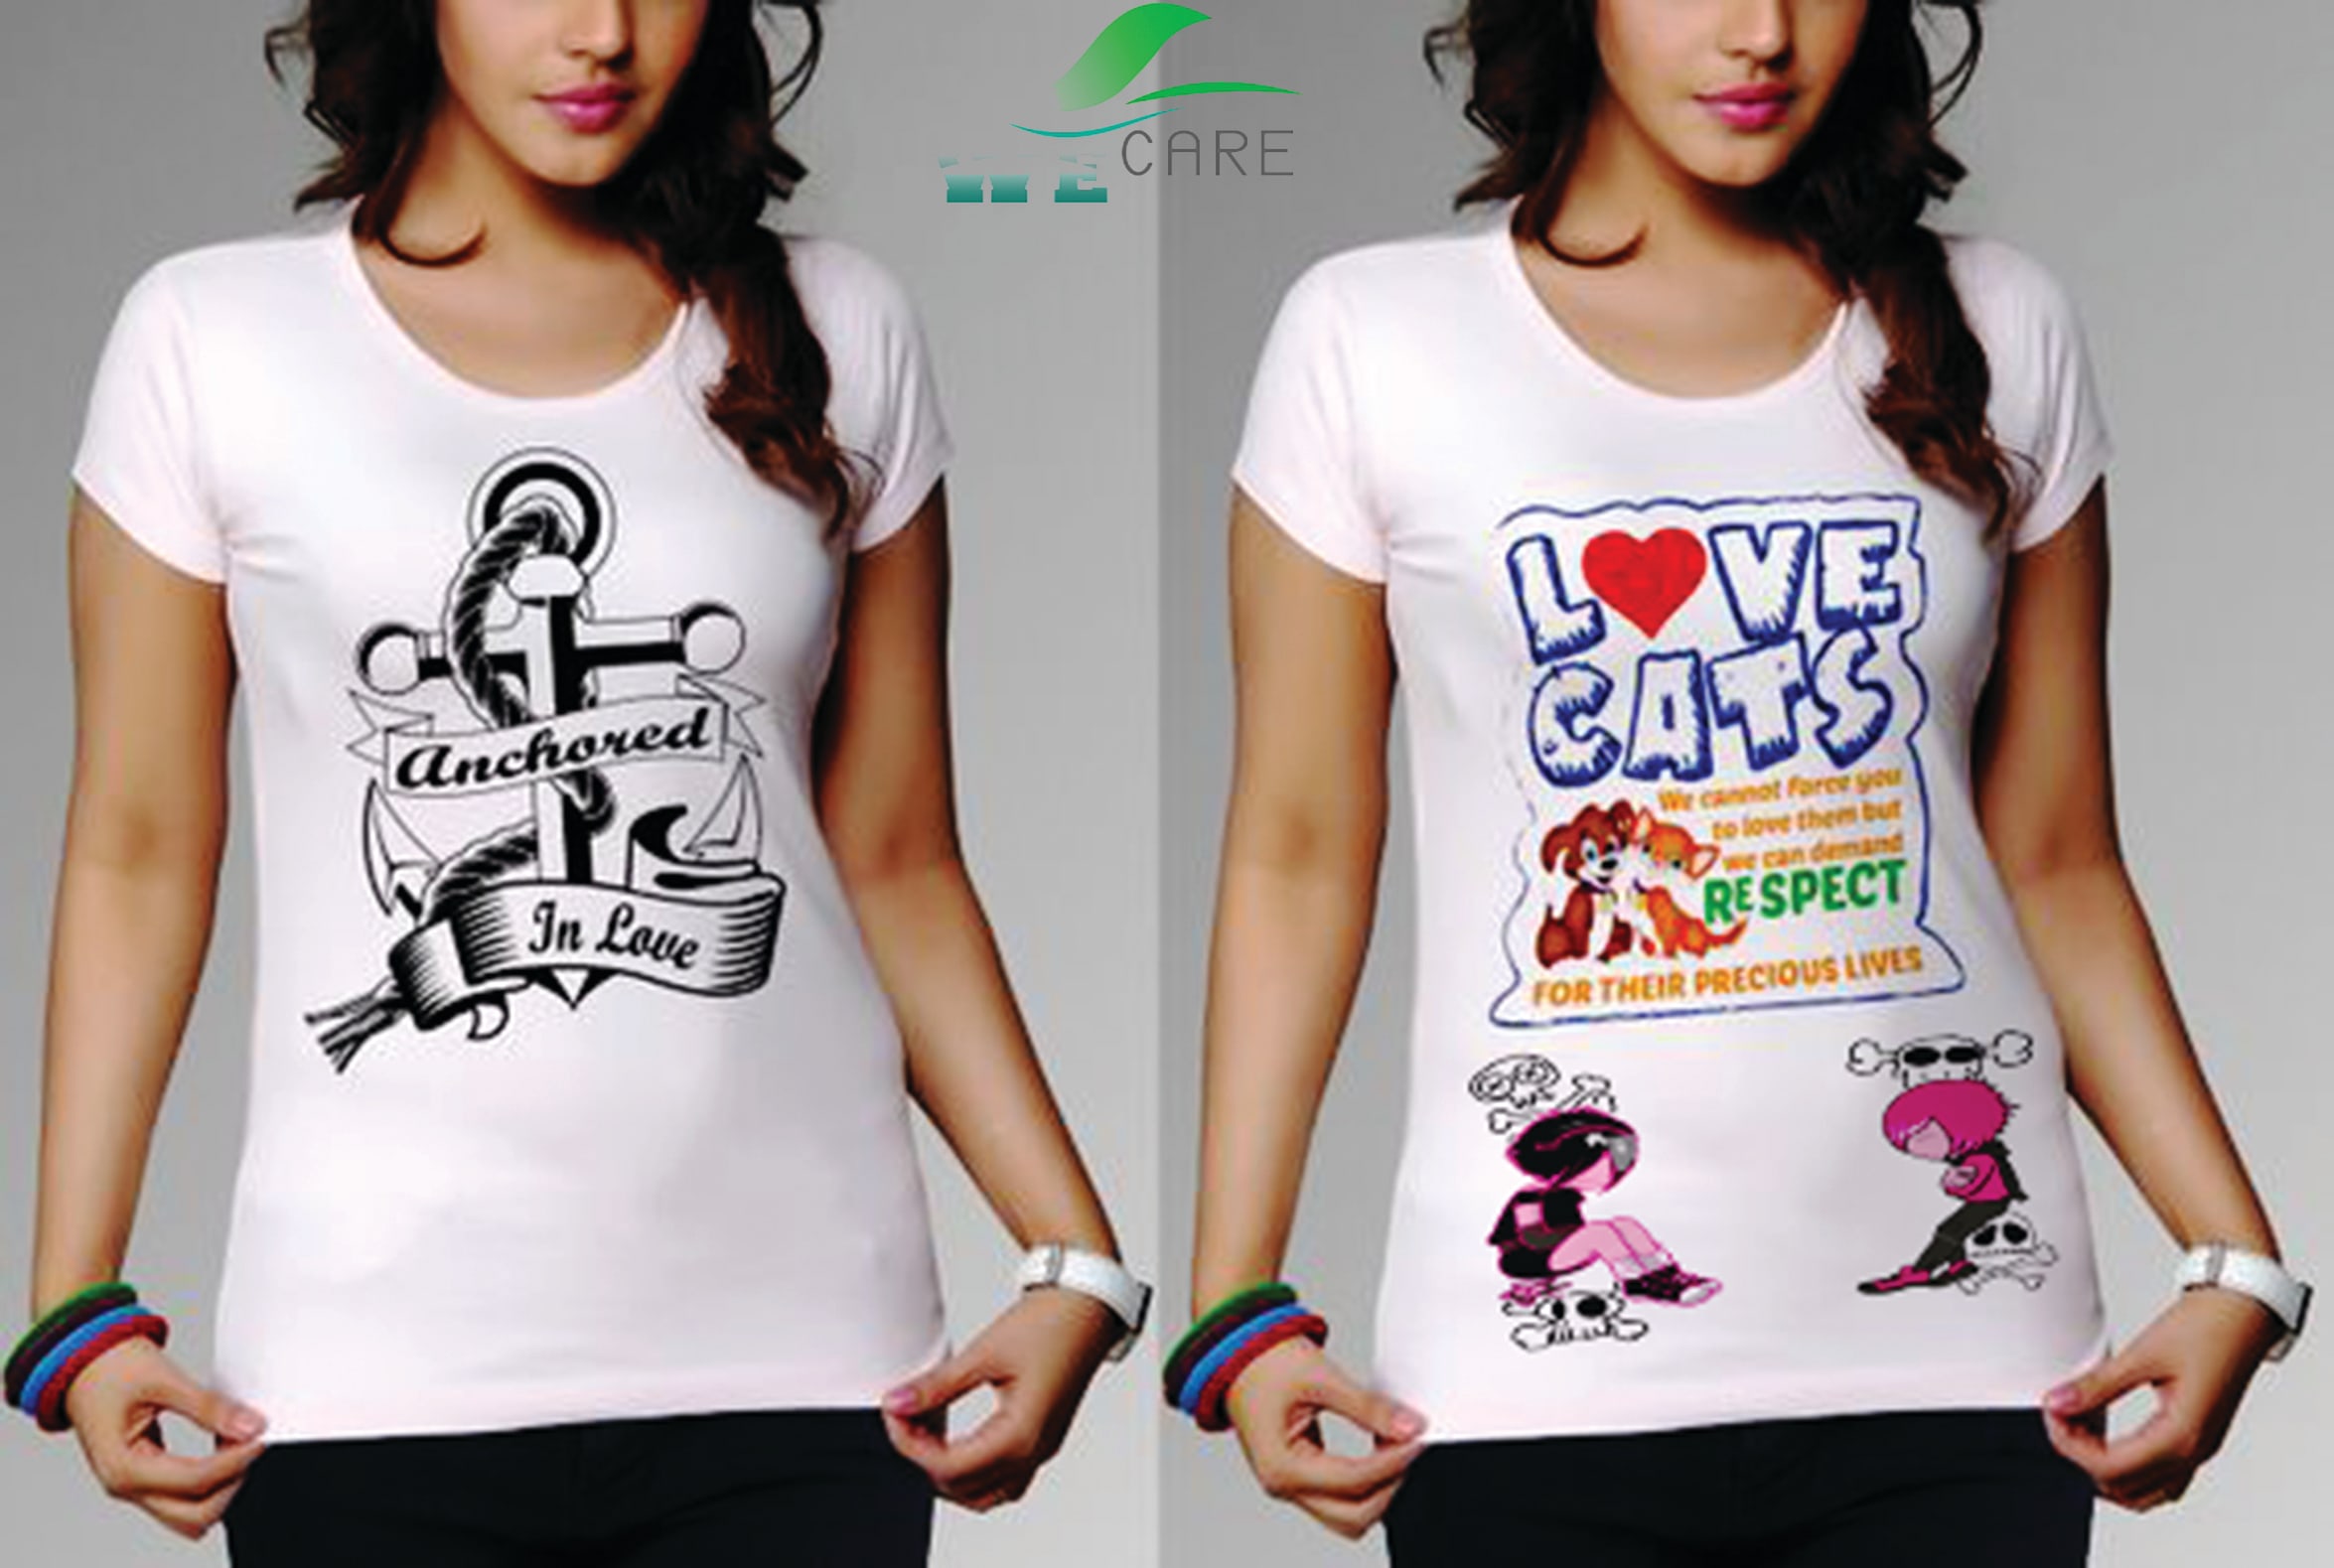 Beste Design the t shirt with creative ideas for you by Zeeshan_ali74 PR-58